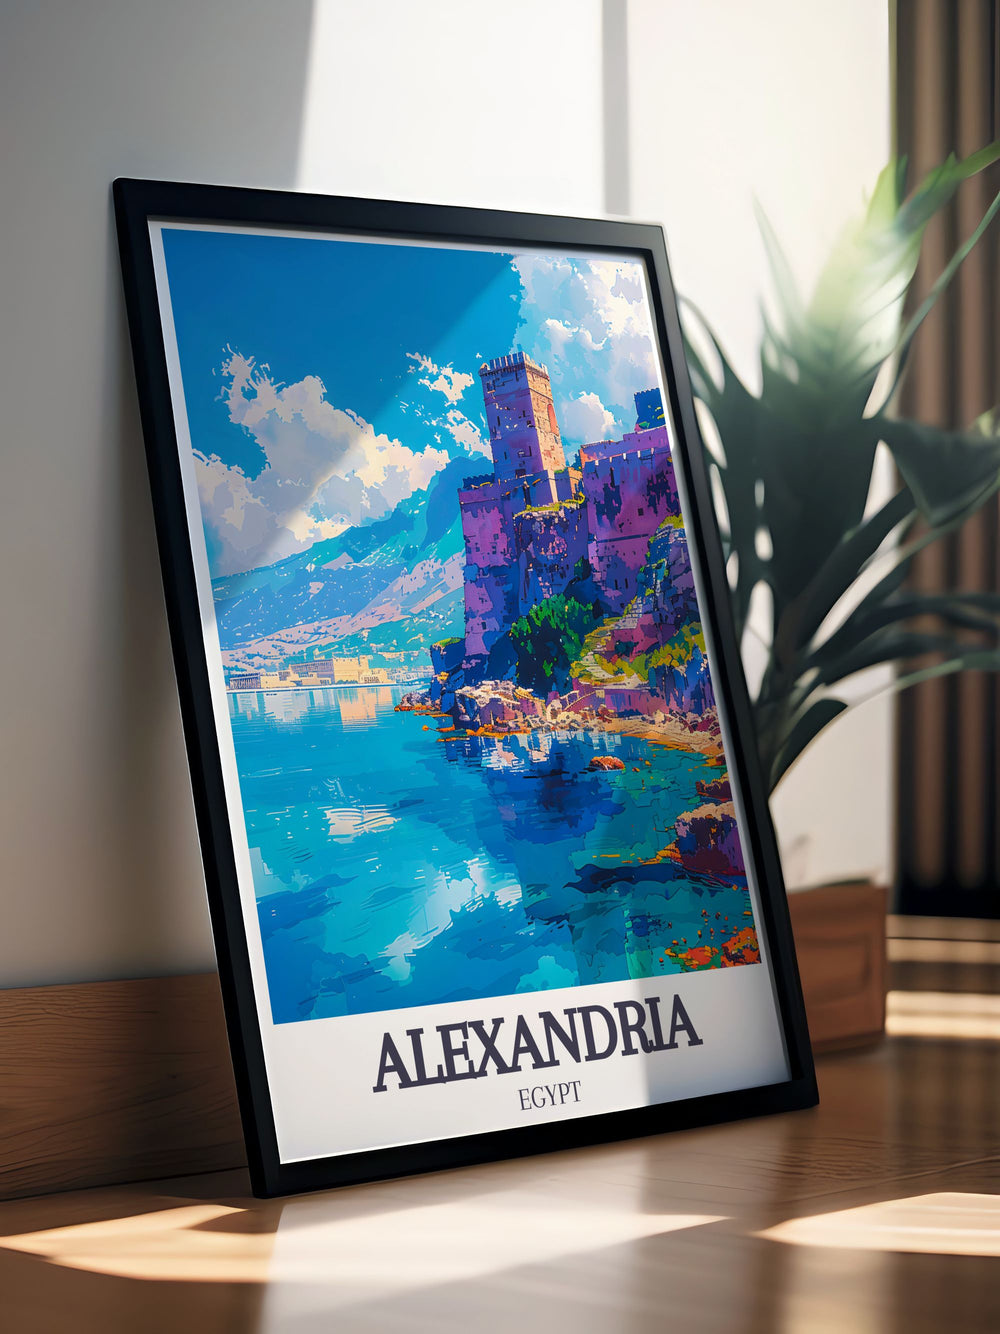 Enhance your home with a stunning Alexandria Egypt poster showcasing the Citadel of Qaitbay Pharos Lighthouse. This fine line print offers a detailed street map view of the historic city and its renowned landmarks, making it an ideal piece for any art lover or travel enthusiast.